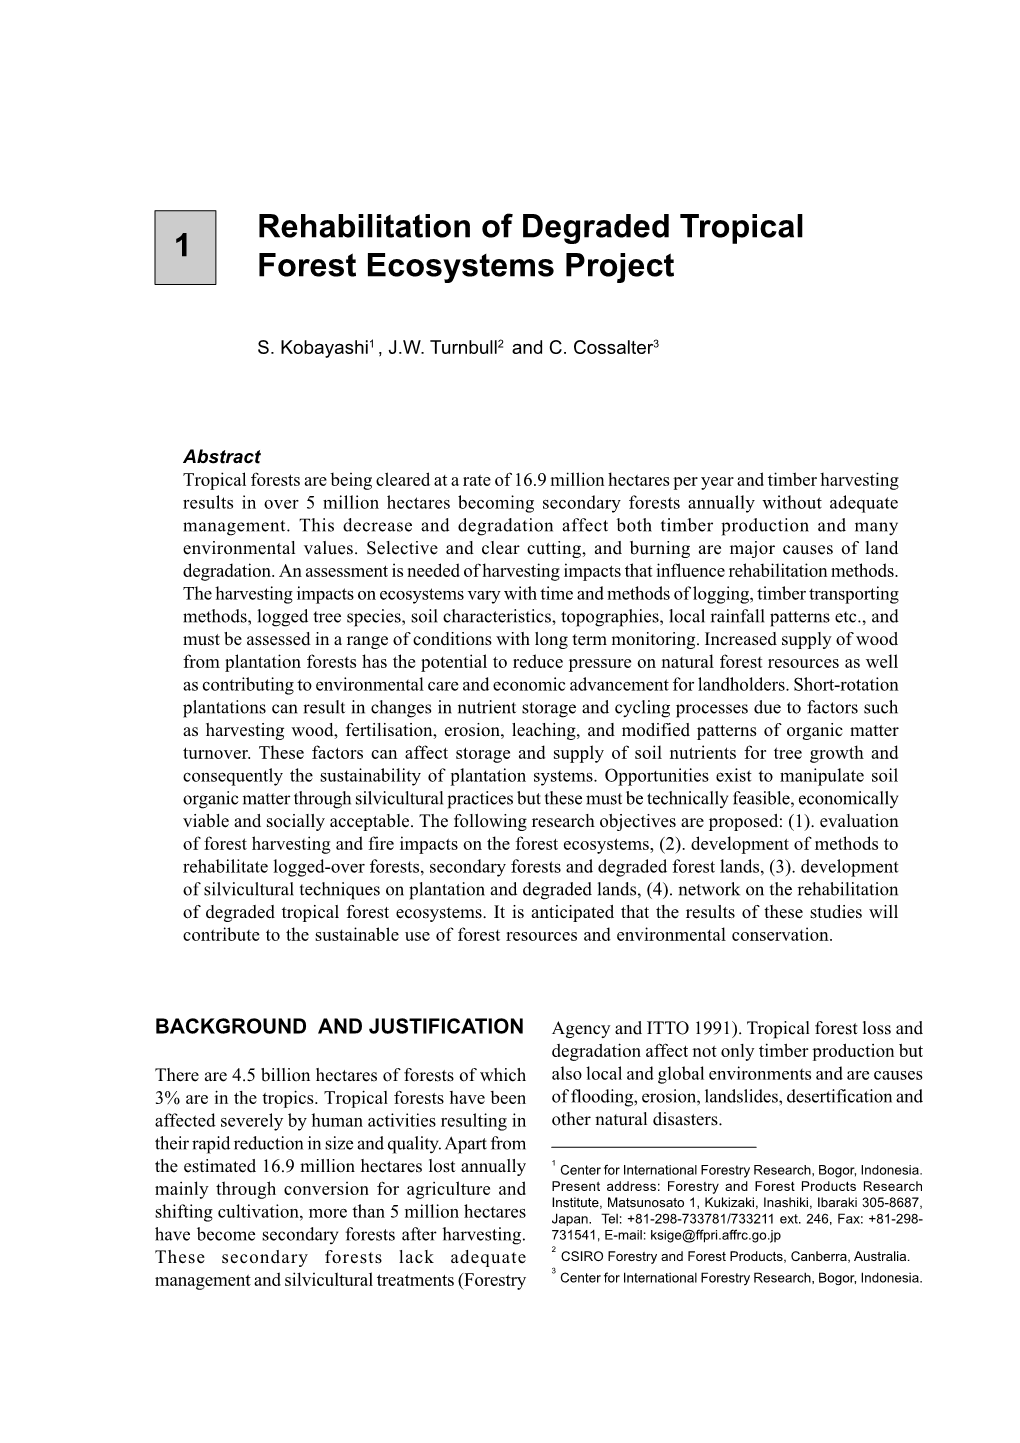 Rehabilitation of Degraded Tropical Forest Ecosystems Project 3